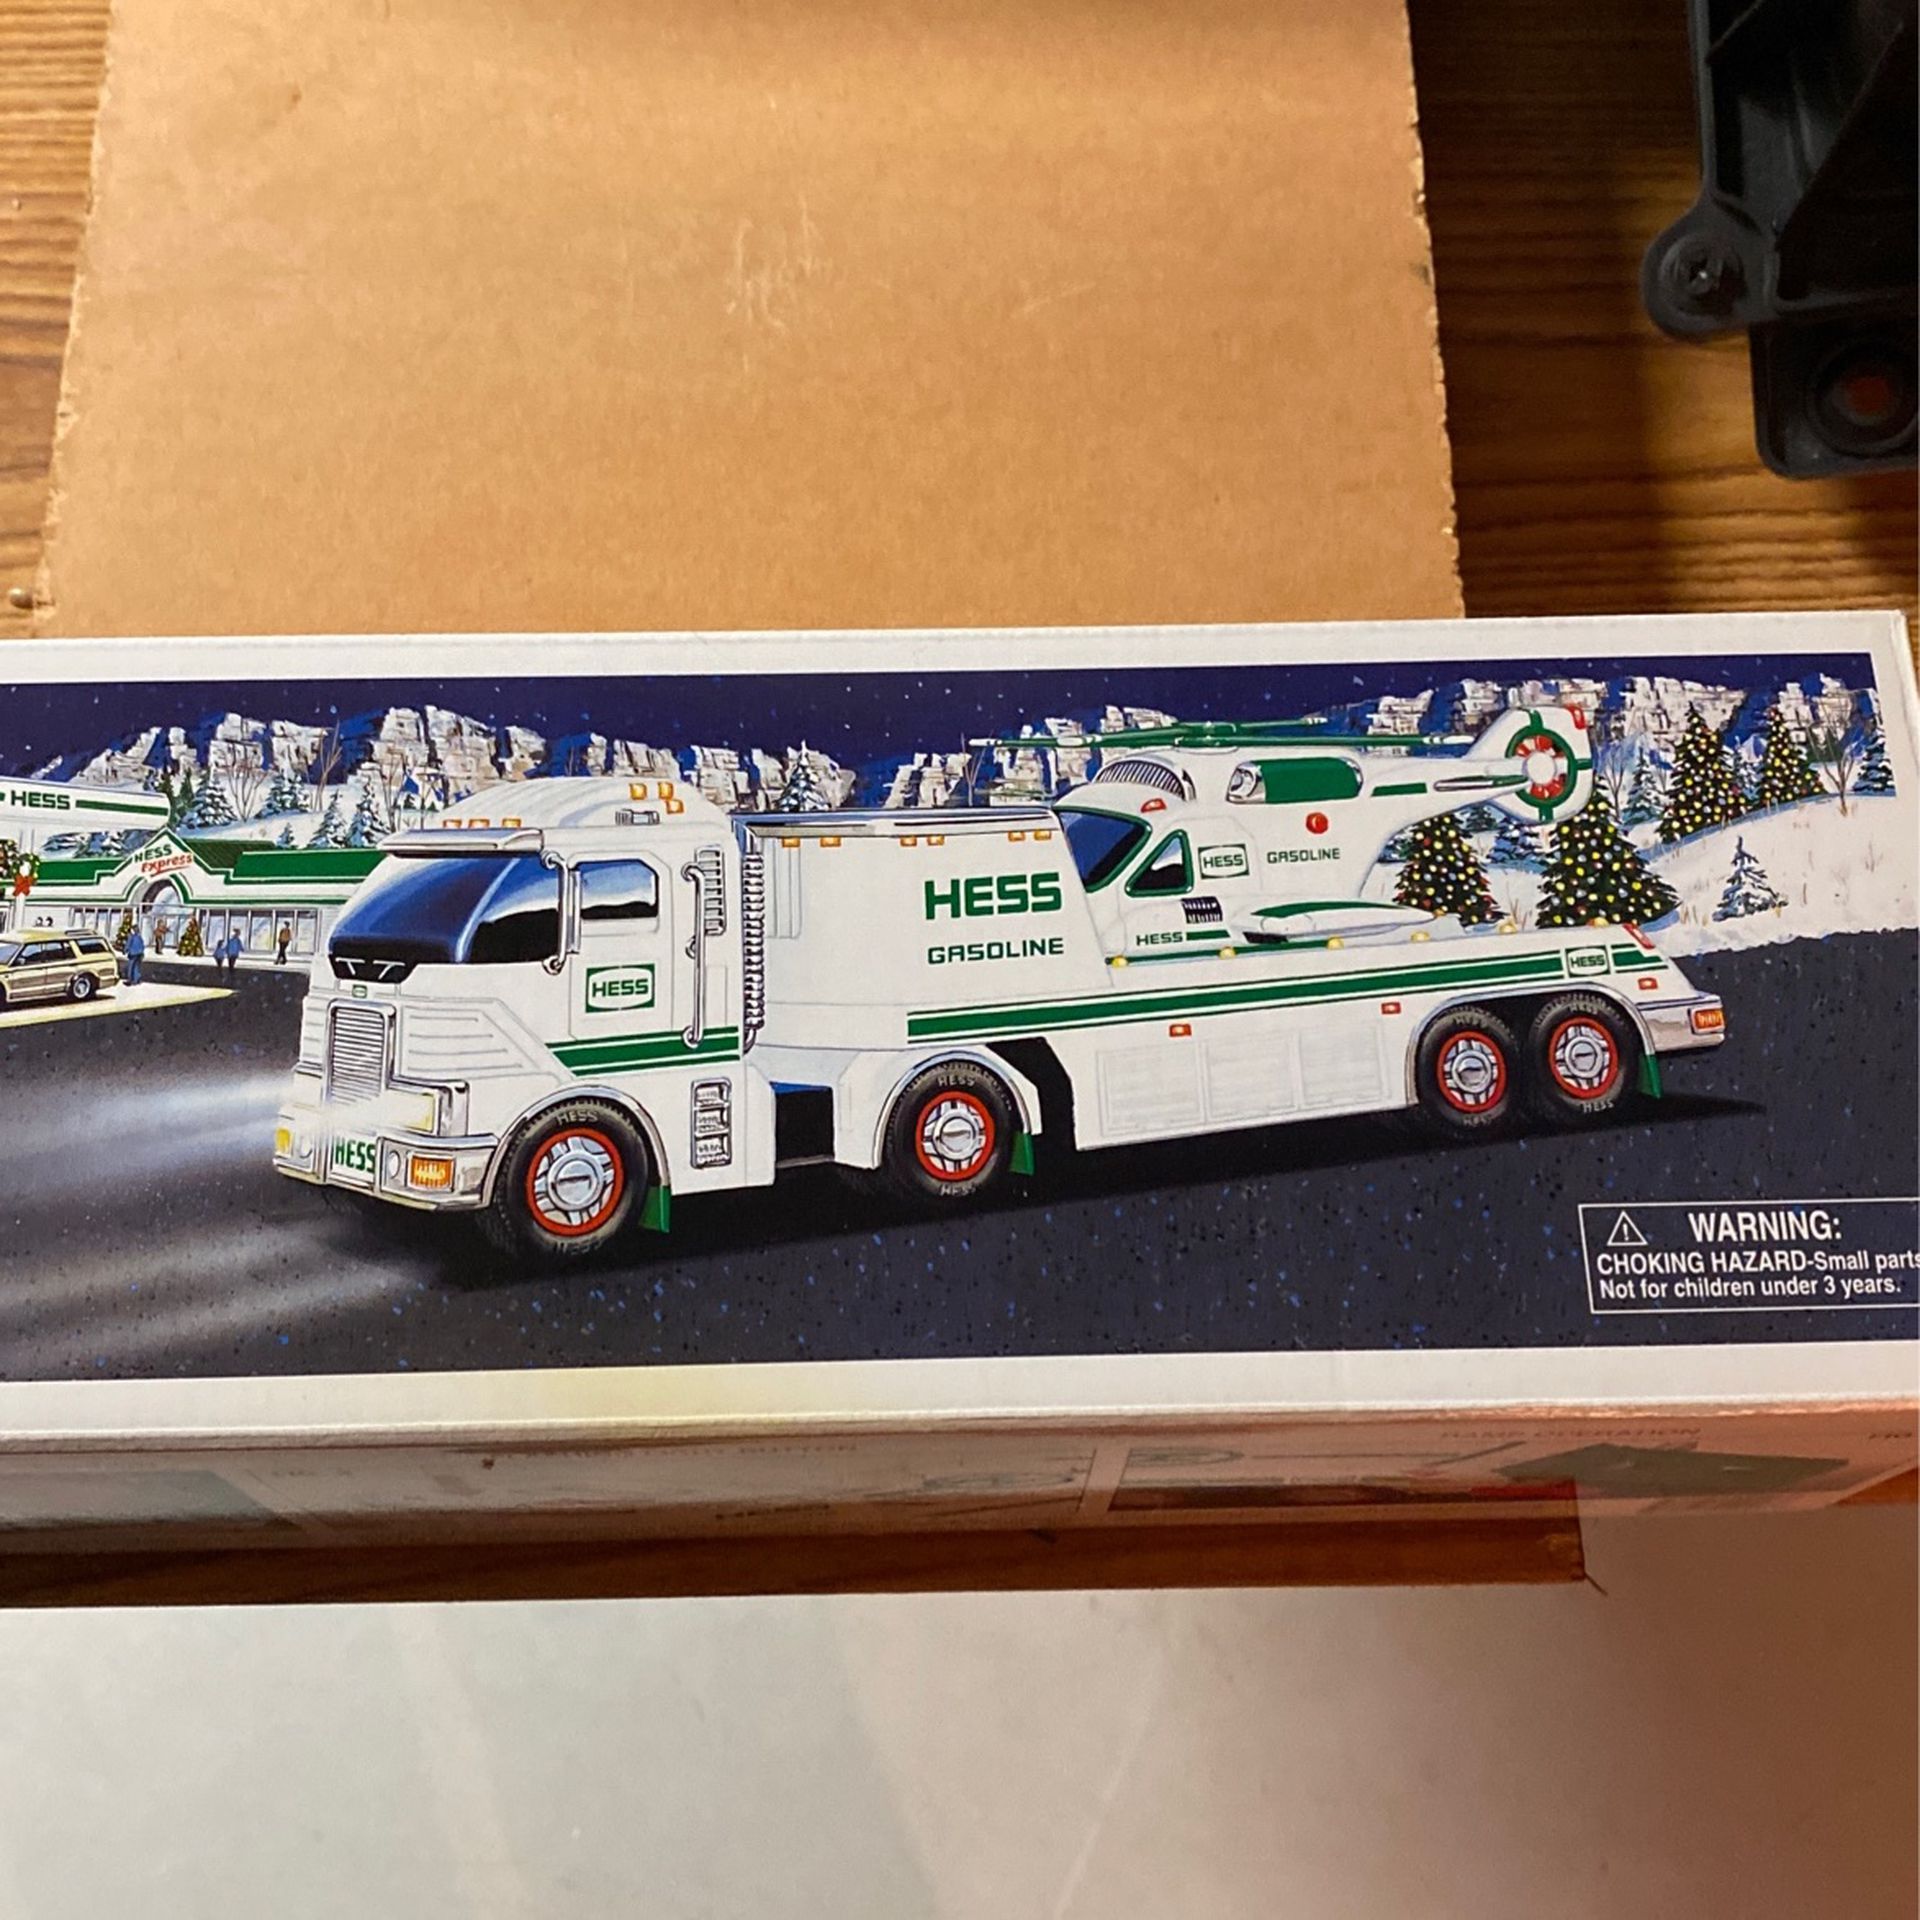 Hess Truck And Helicopter Toy